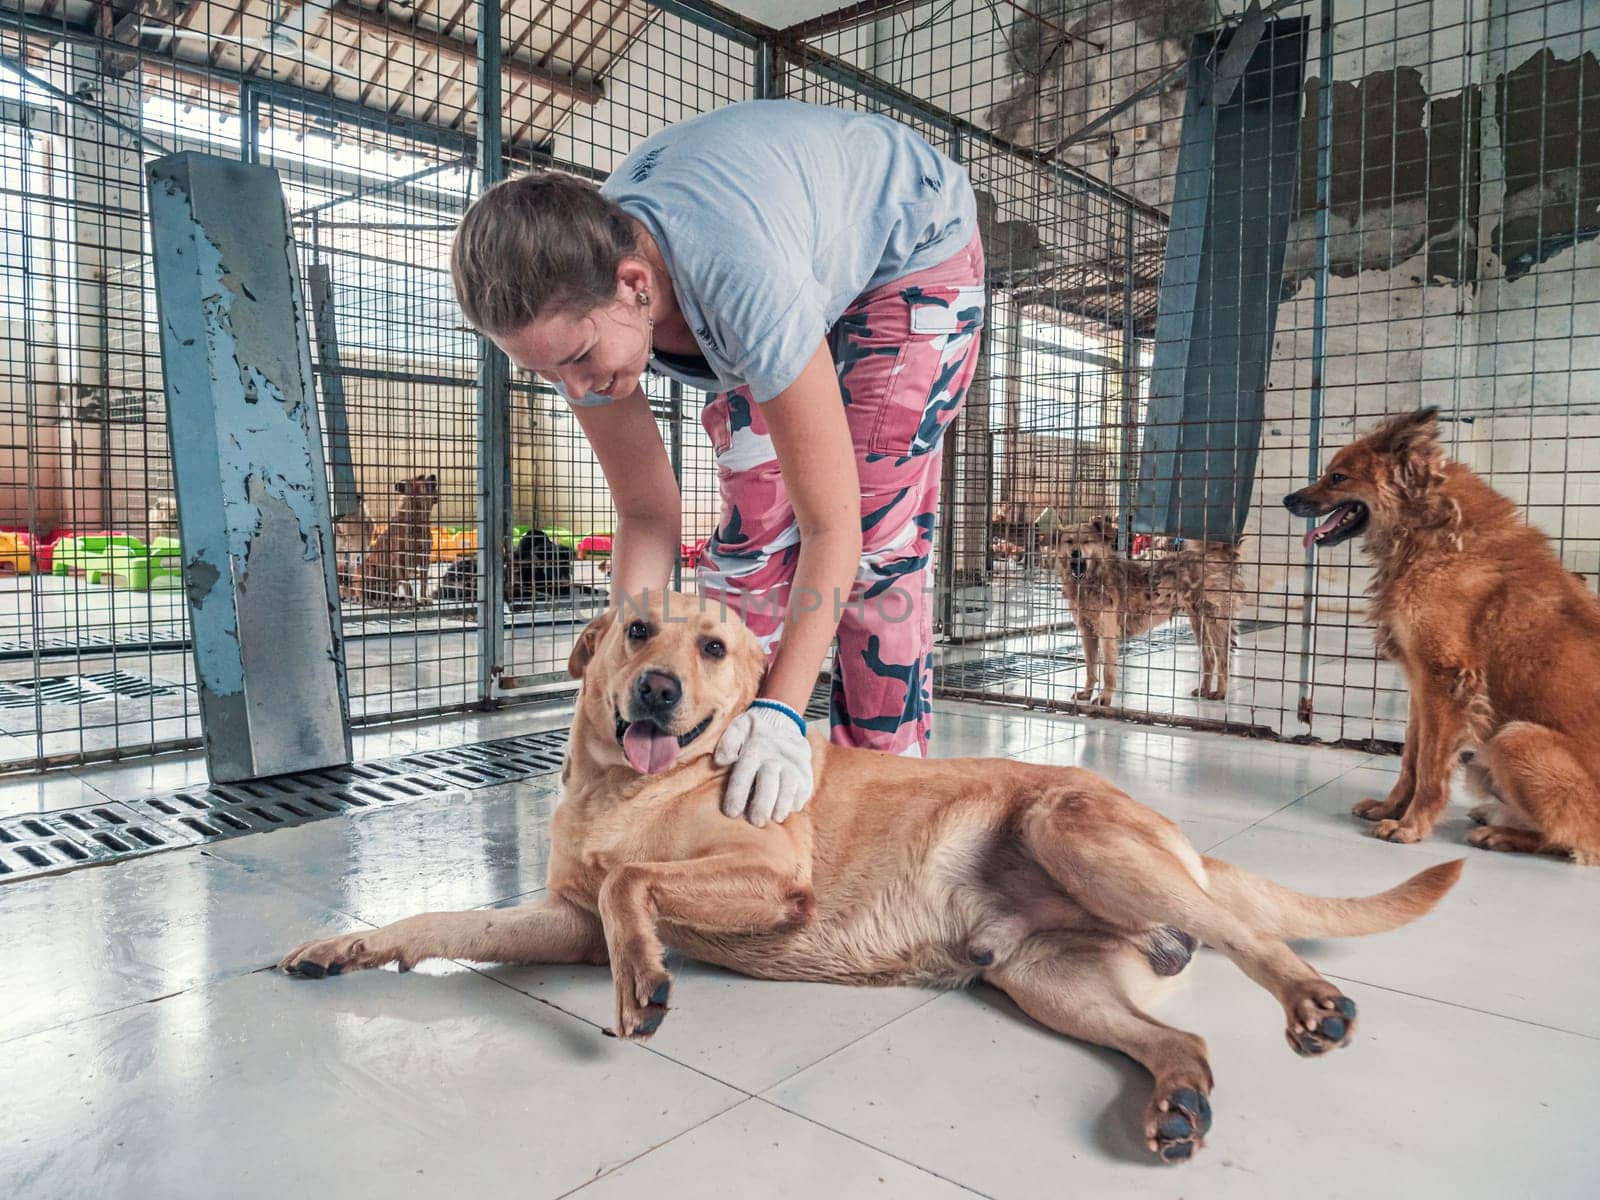 Young girl petting caged stray dog in pet shelter. People, Animals, Volunteering And Helping Concept. by Busker